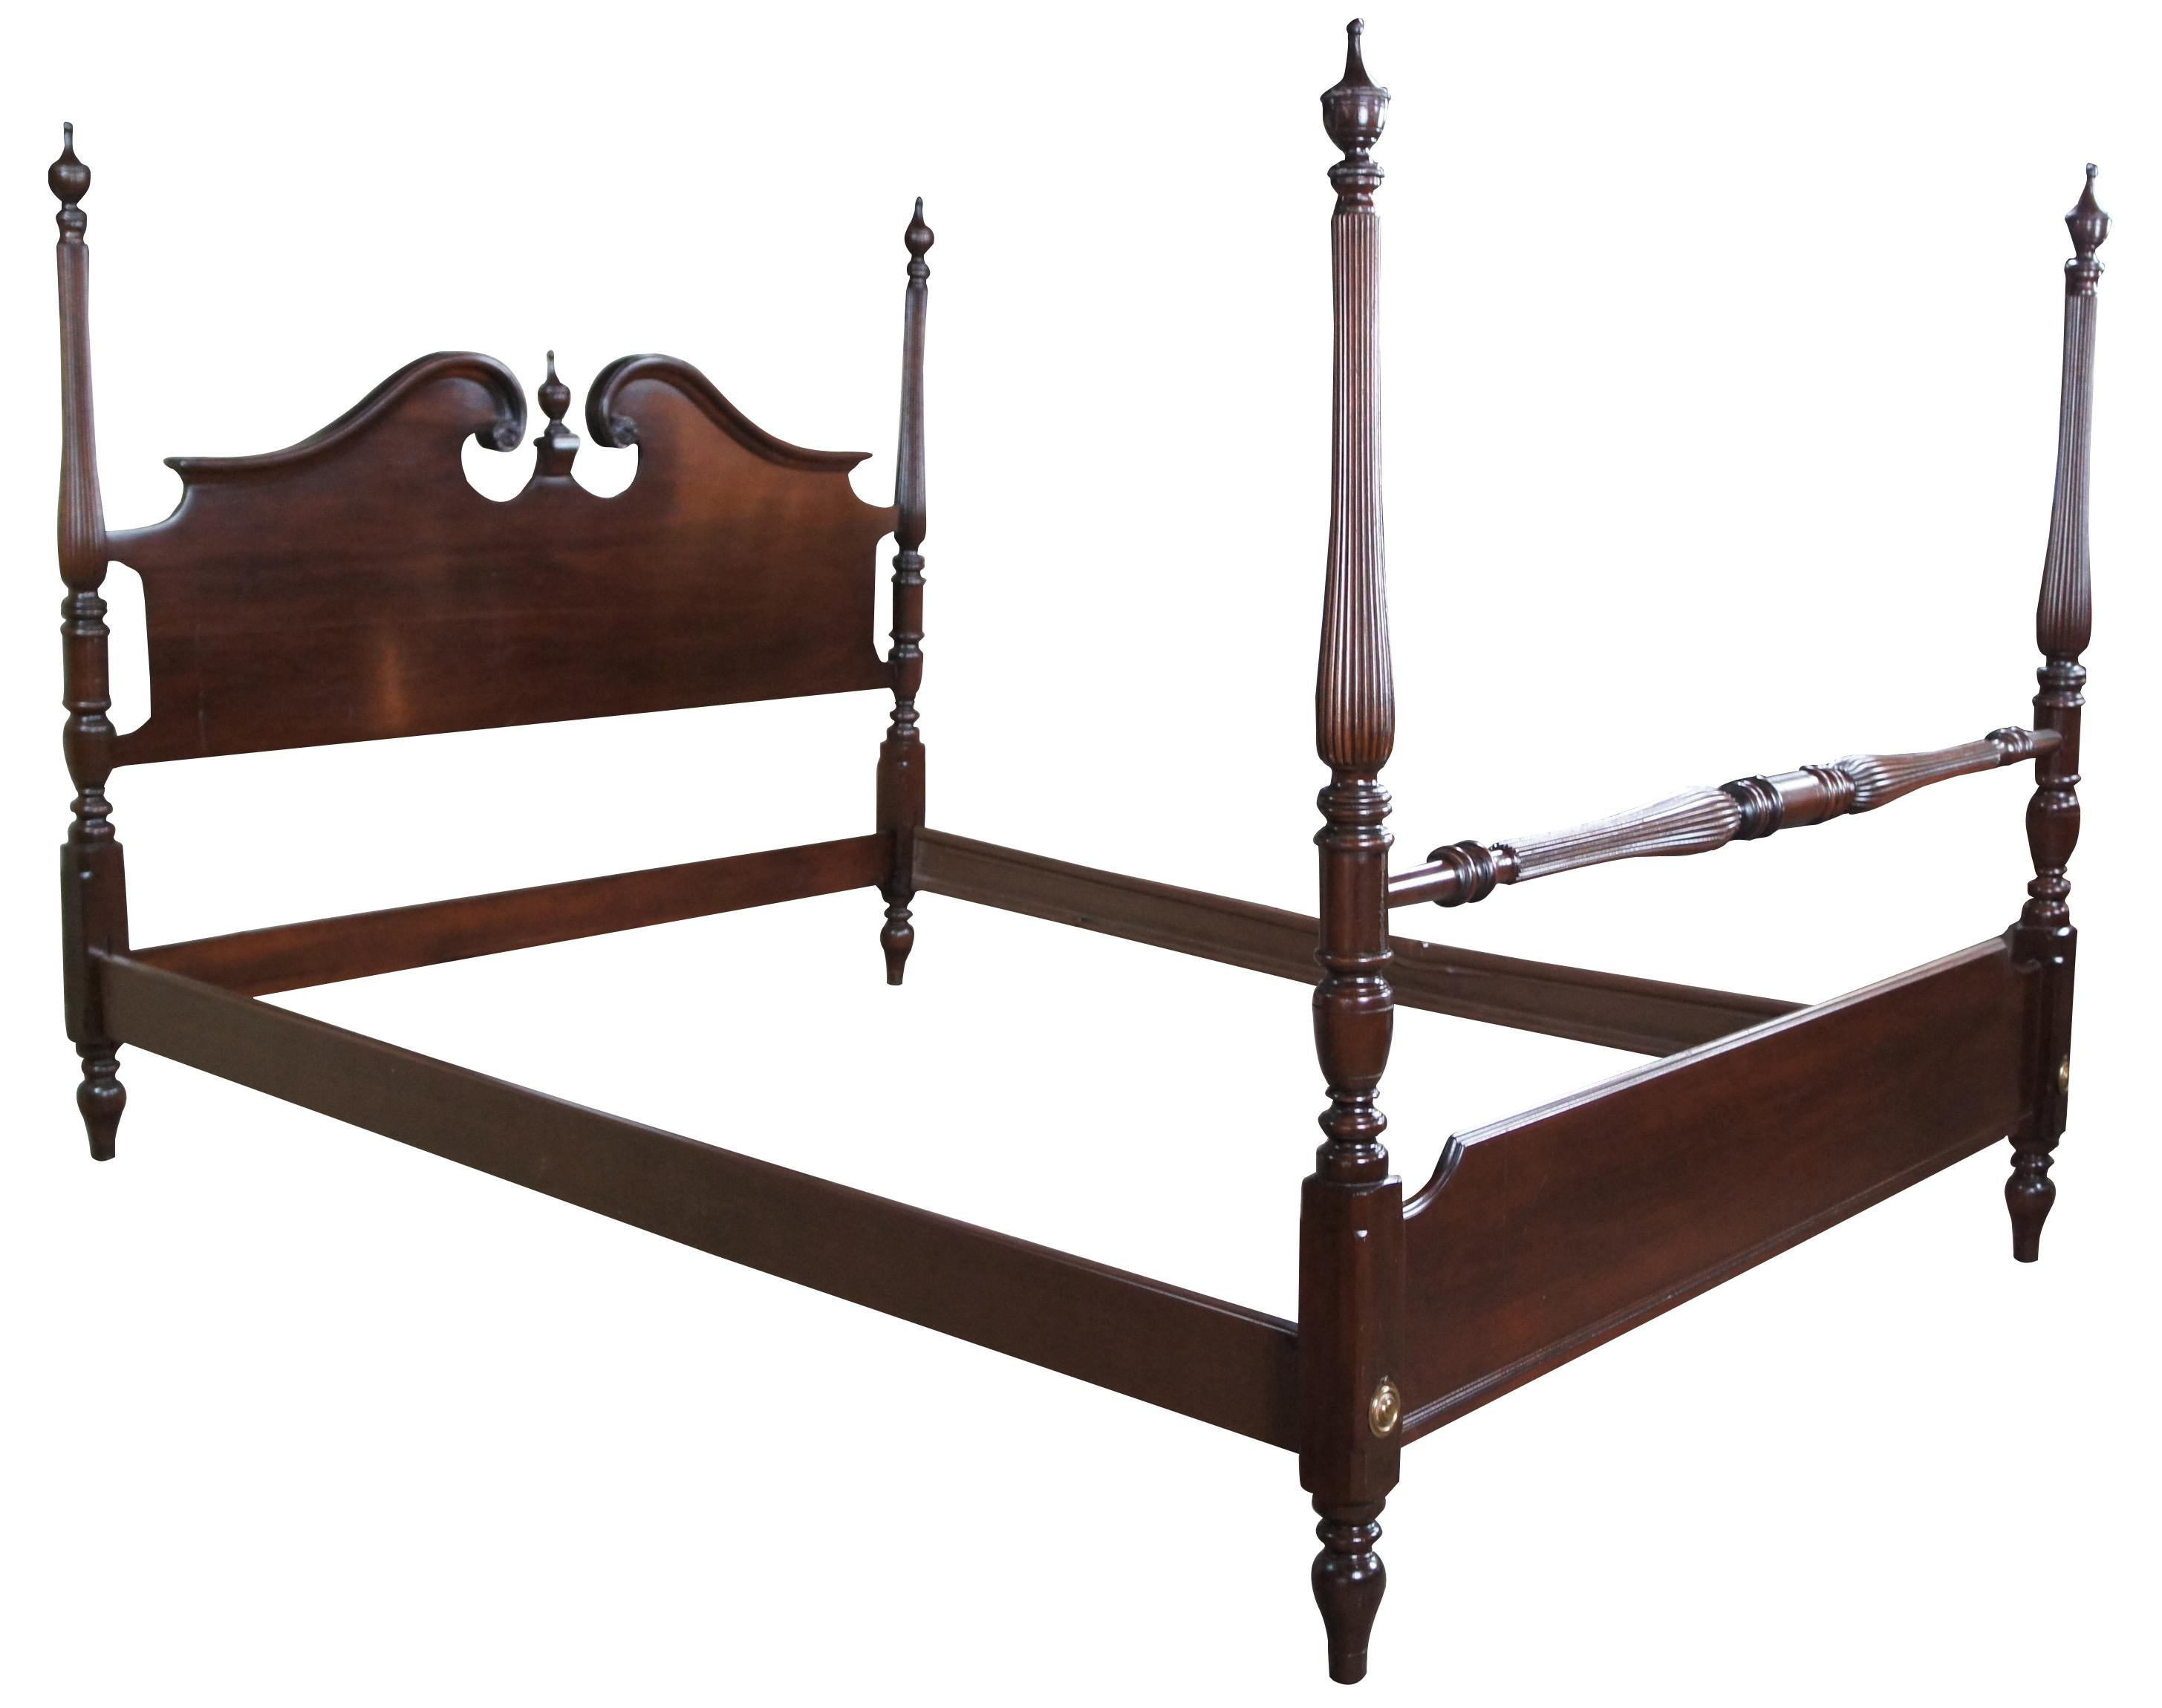 Vintage 1988 Ethan Allen Georgian Court pediment poster bed. Made of dark cherry featuring serpentine form with open pediment, finials, fluting and floral medallions. 11-5654. 225.

Measures: 56.5